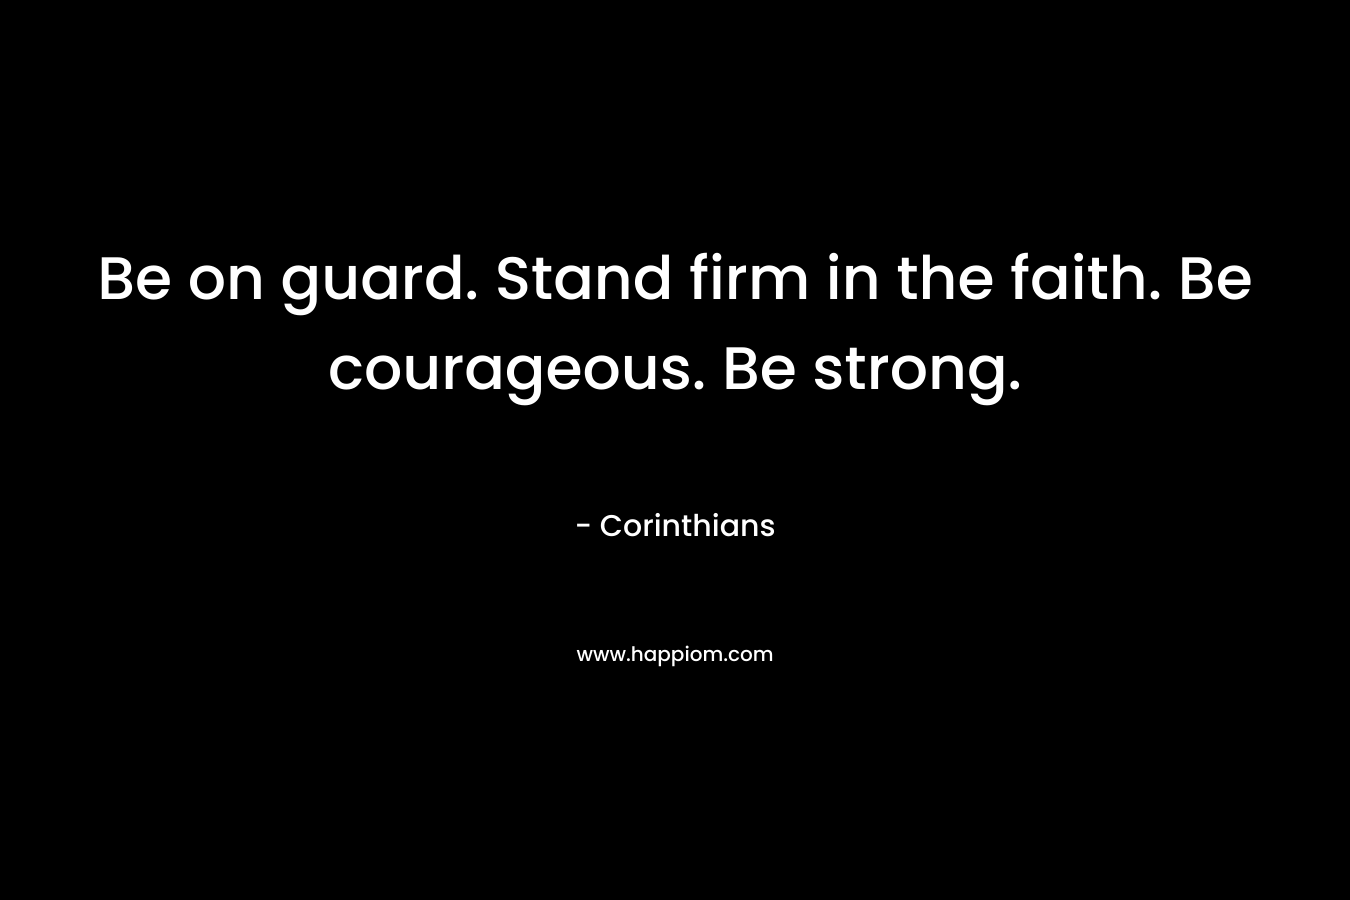 Be on guard. Stand firm in the faith. Be courageous. Be strong.